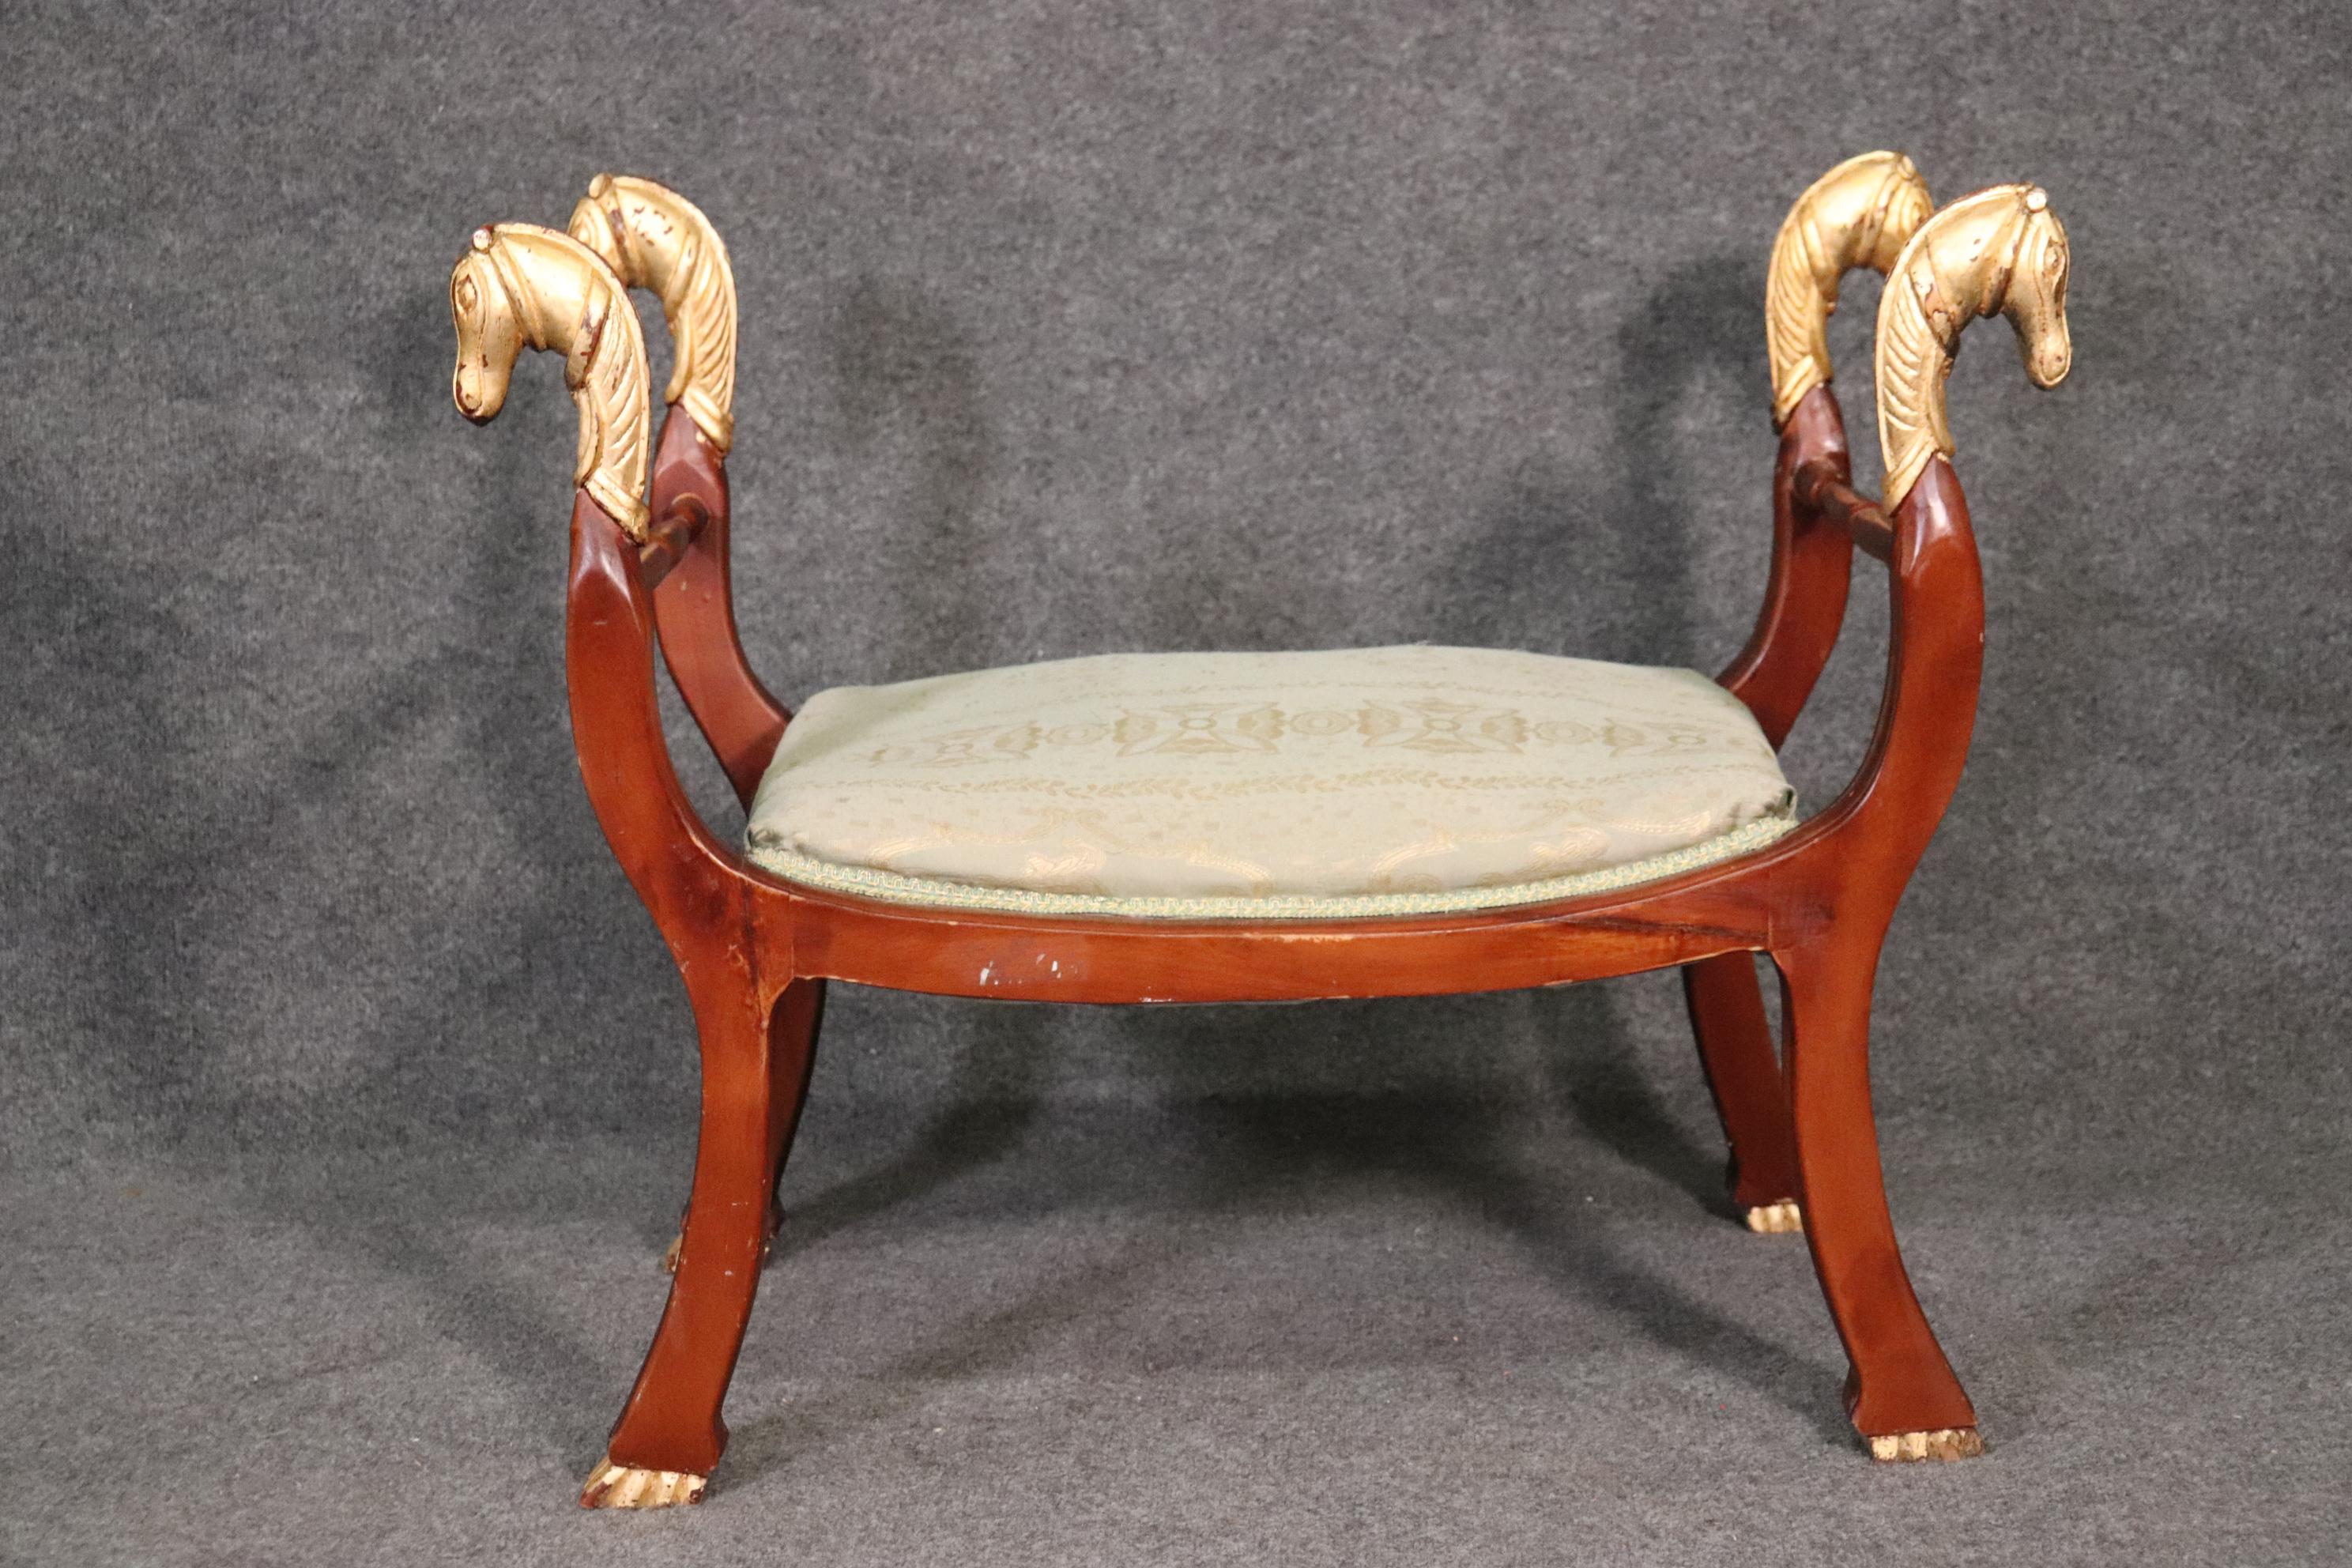 Egyptian Revival Gilded Cerule Form Gilded Horse Head Bench Stool In Good Condition For Sale In Swedesboro, NJ